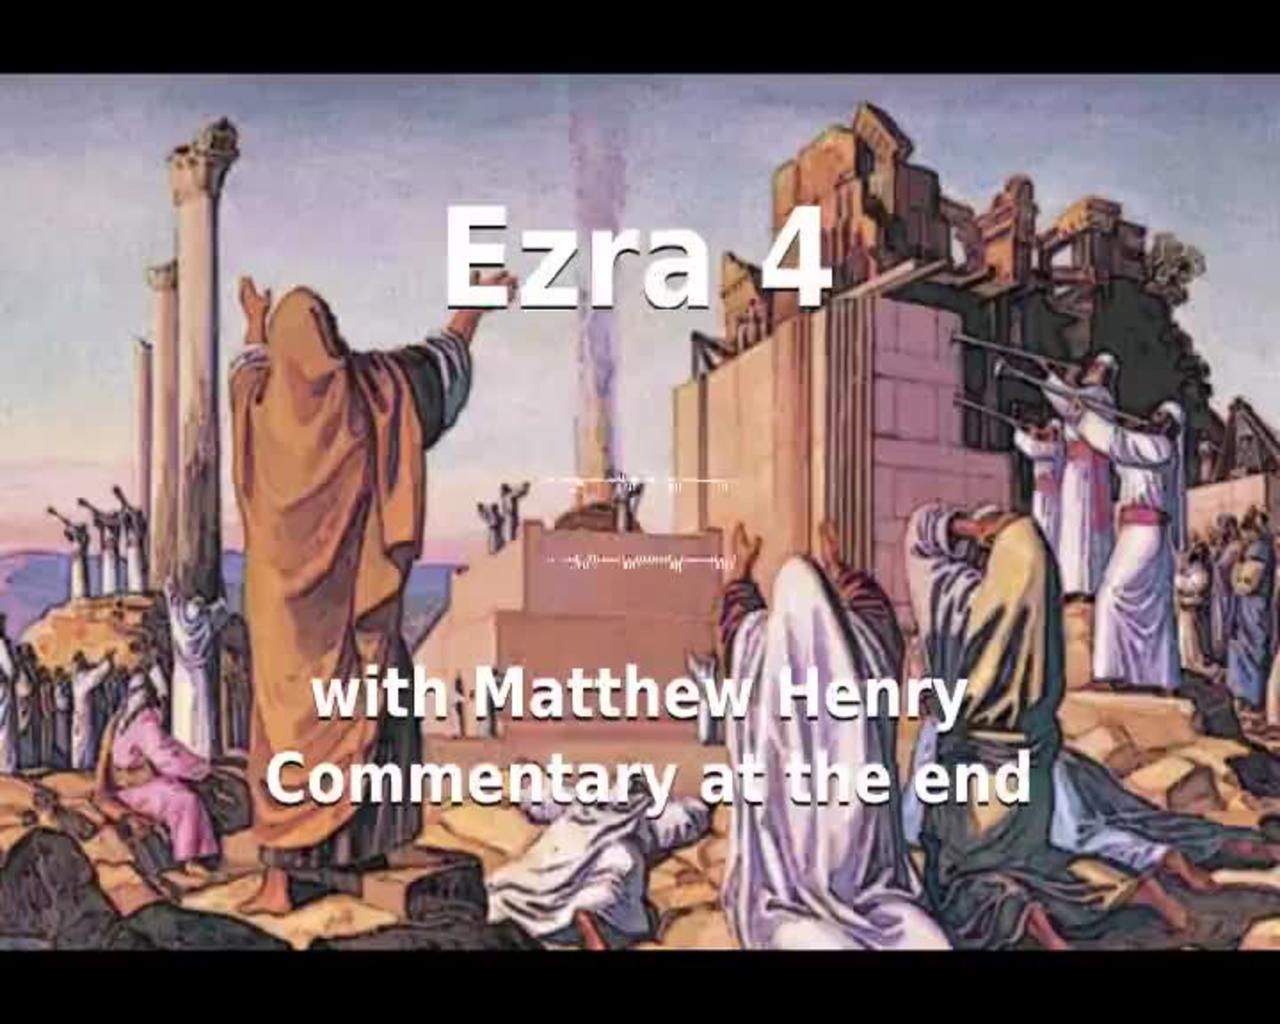 📖🕯 Holy Bible - Ezra 4 with Matthew Henry Commentary at the end.